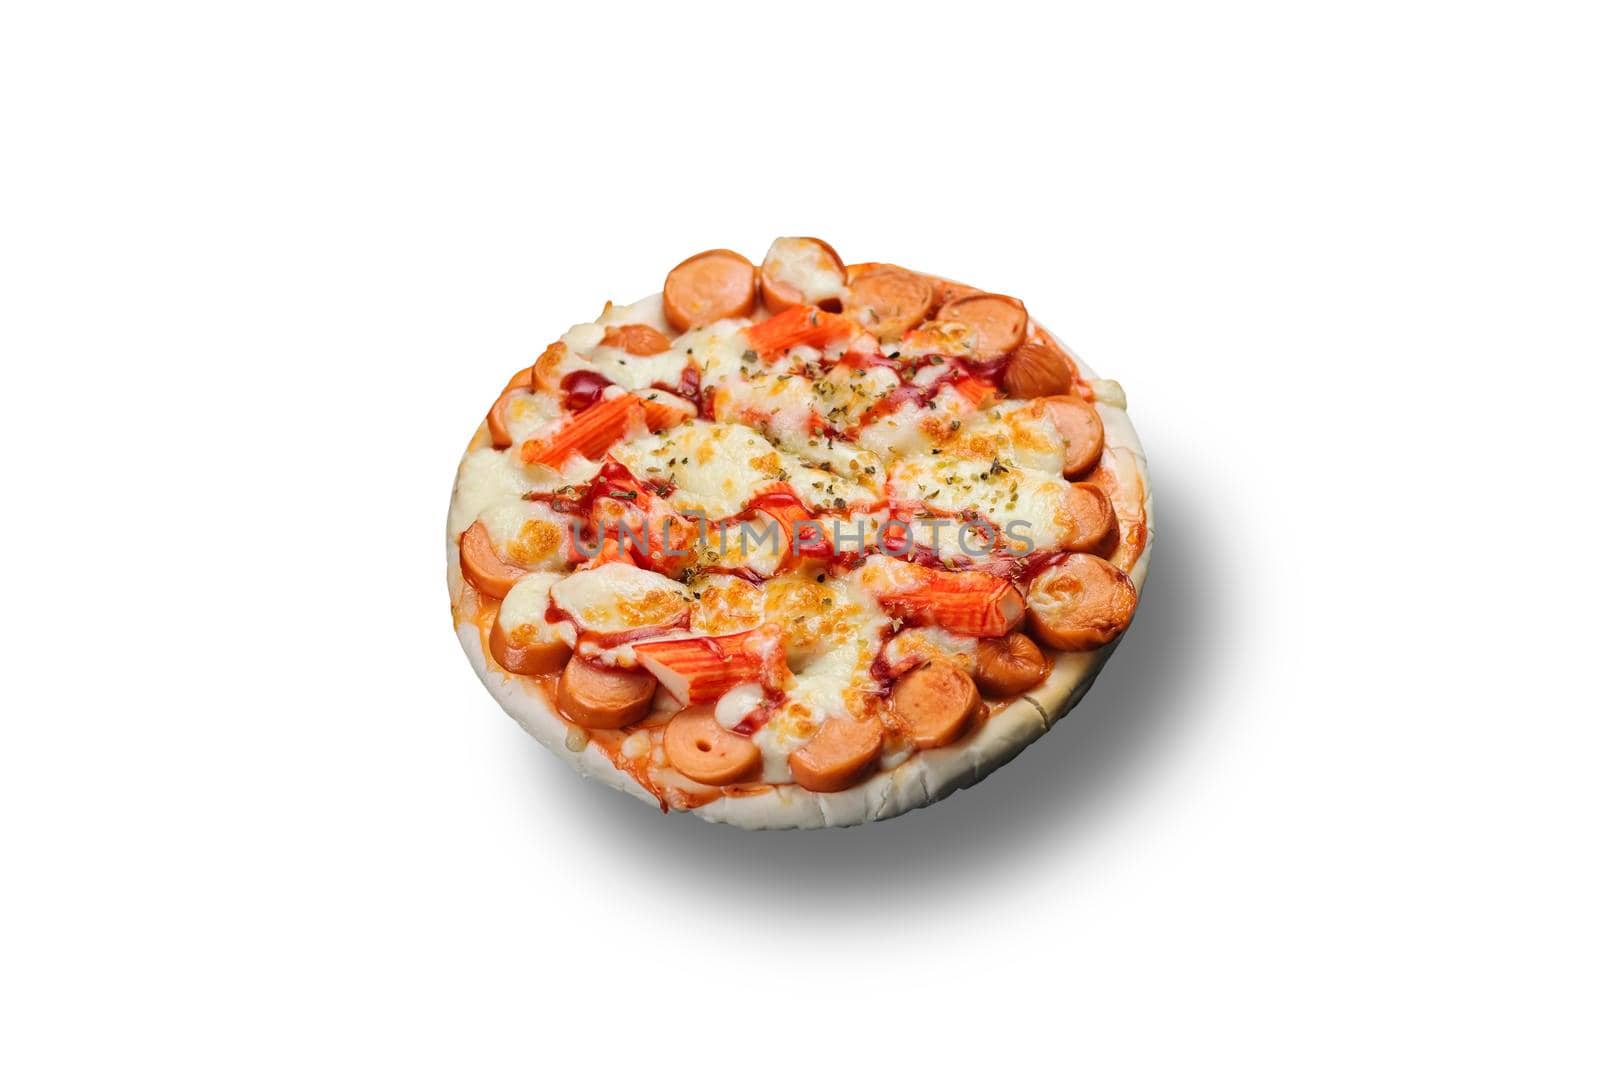 Sausage and Crab Stick Pizza on white background. by wattanaphob